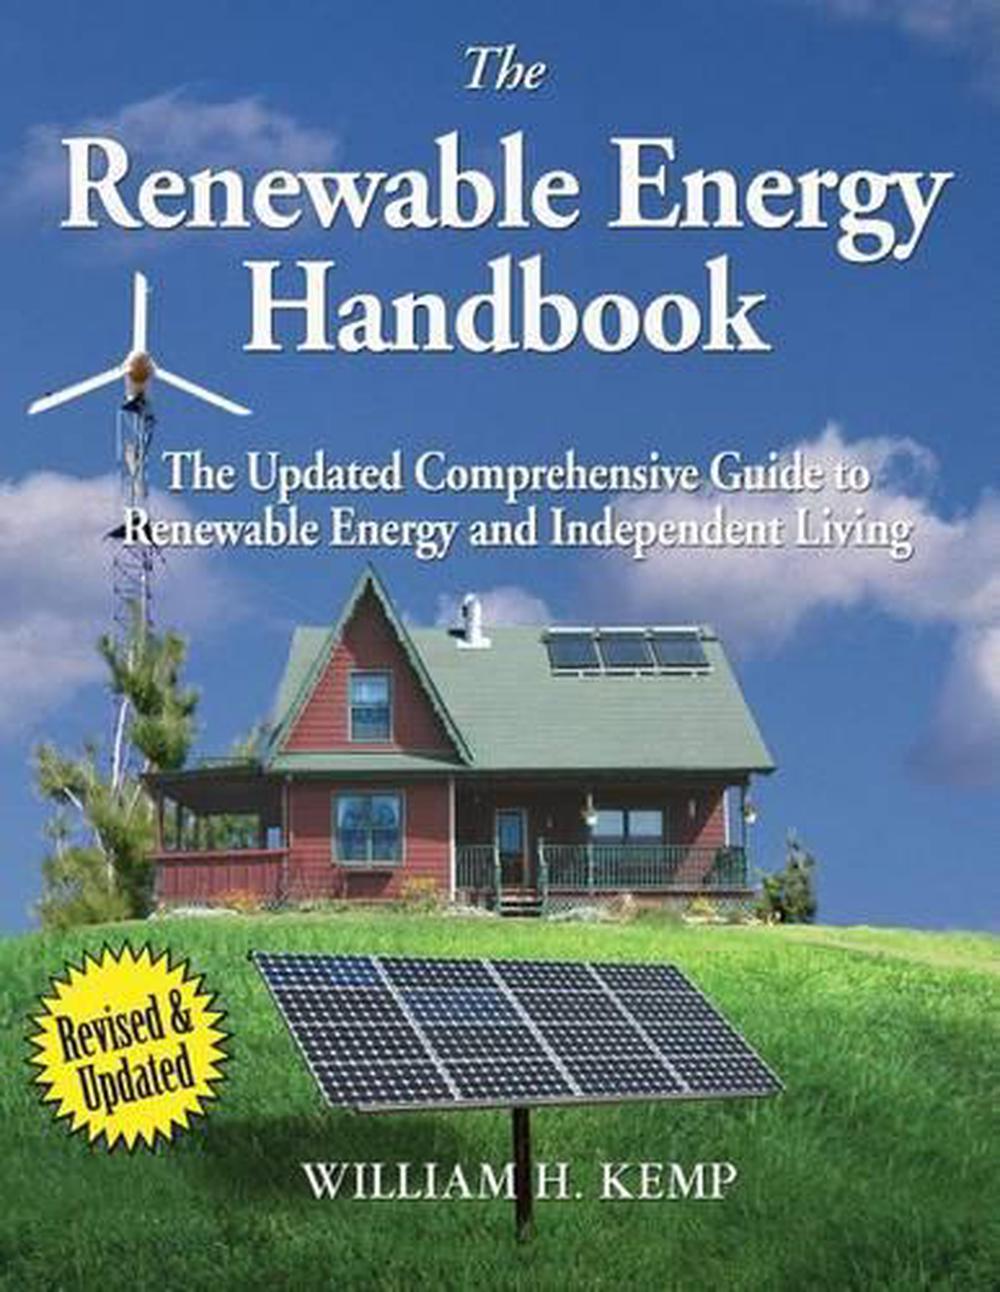 sources of energy books pdf